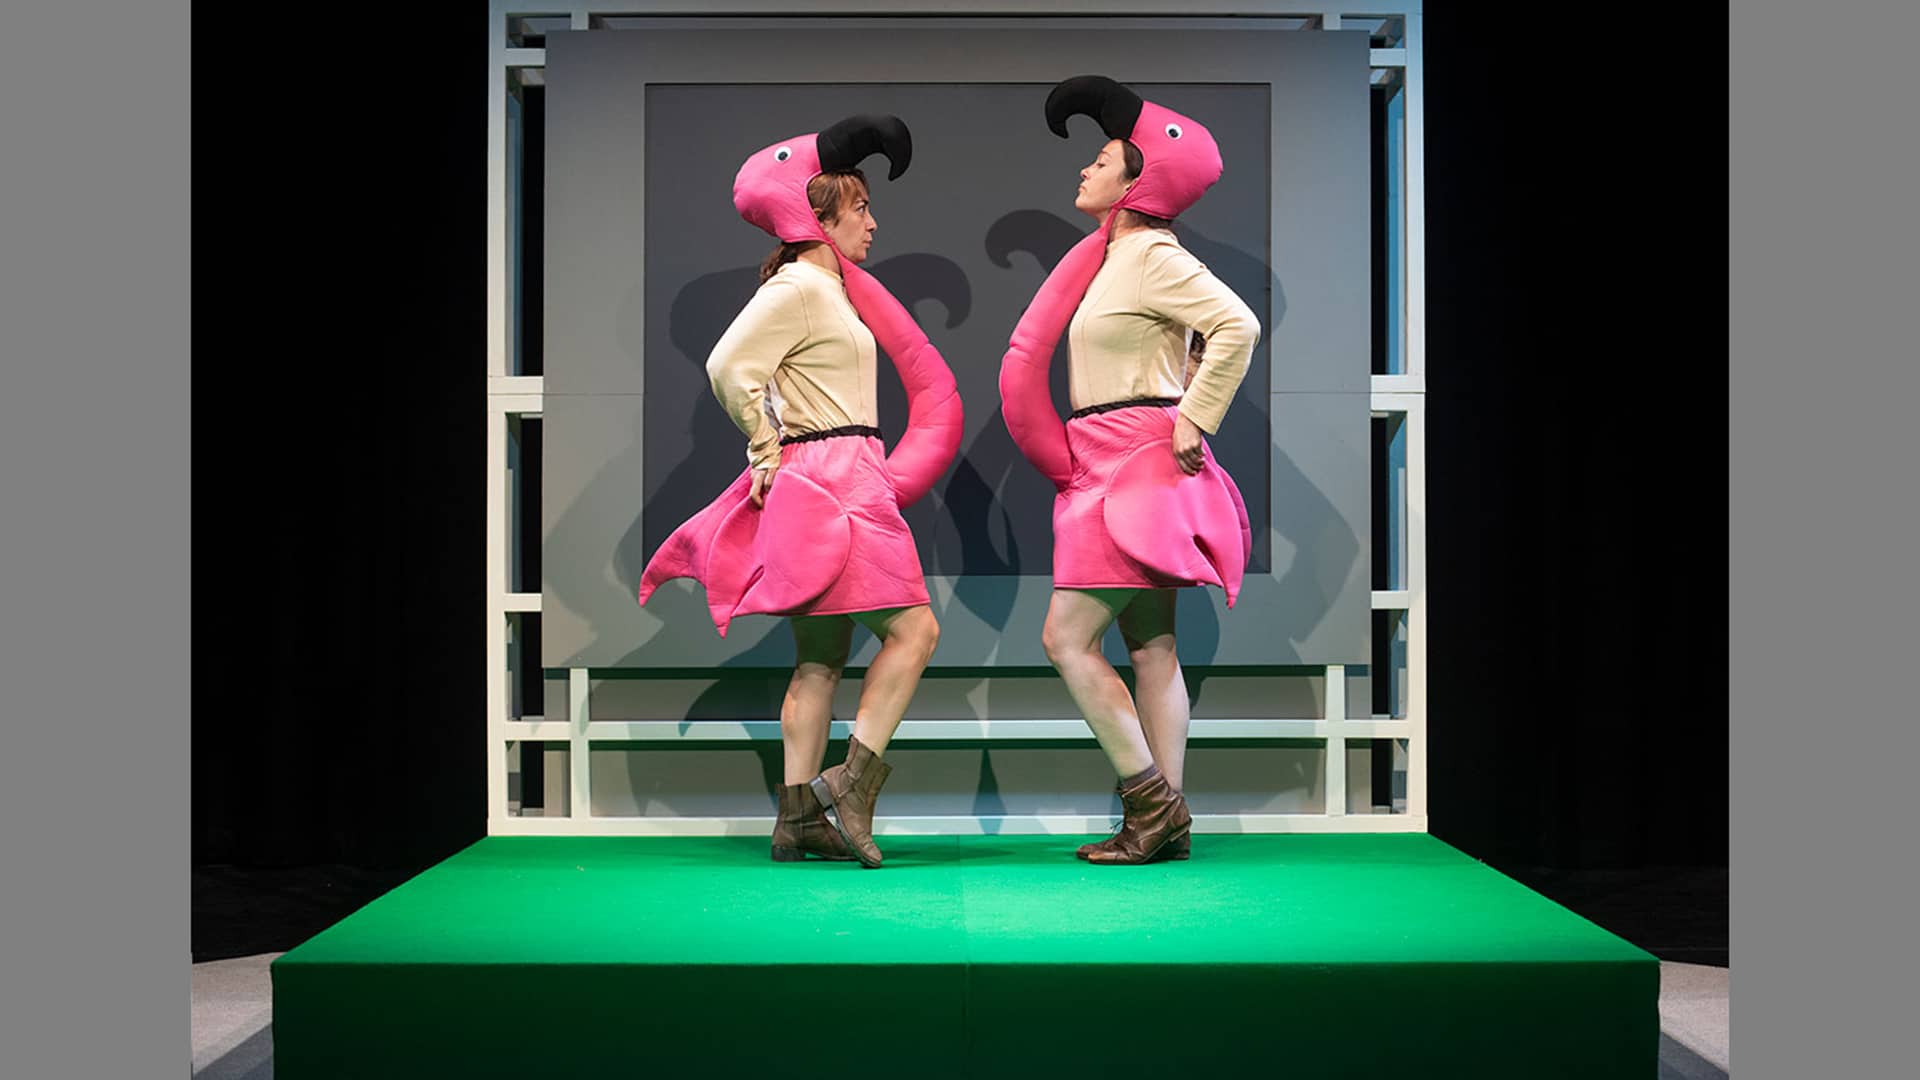 The two performers are dressed as flamingos. They face each other on stage, their arms bent like wings